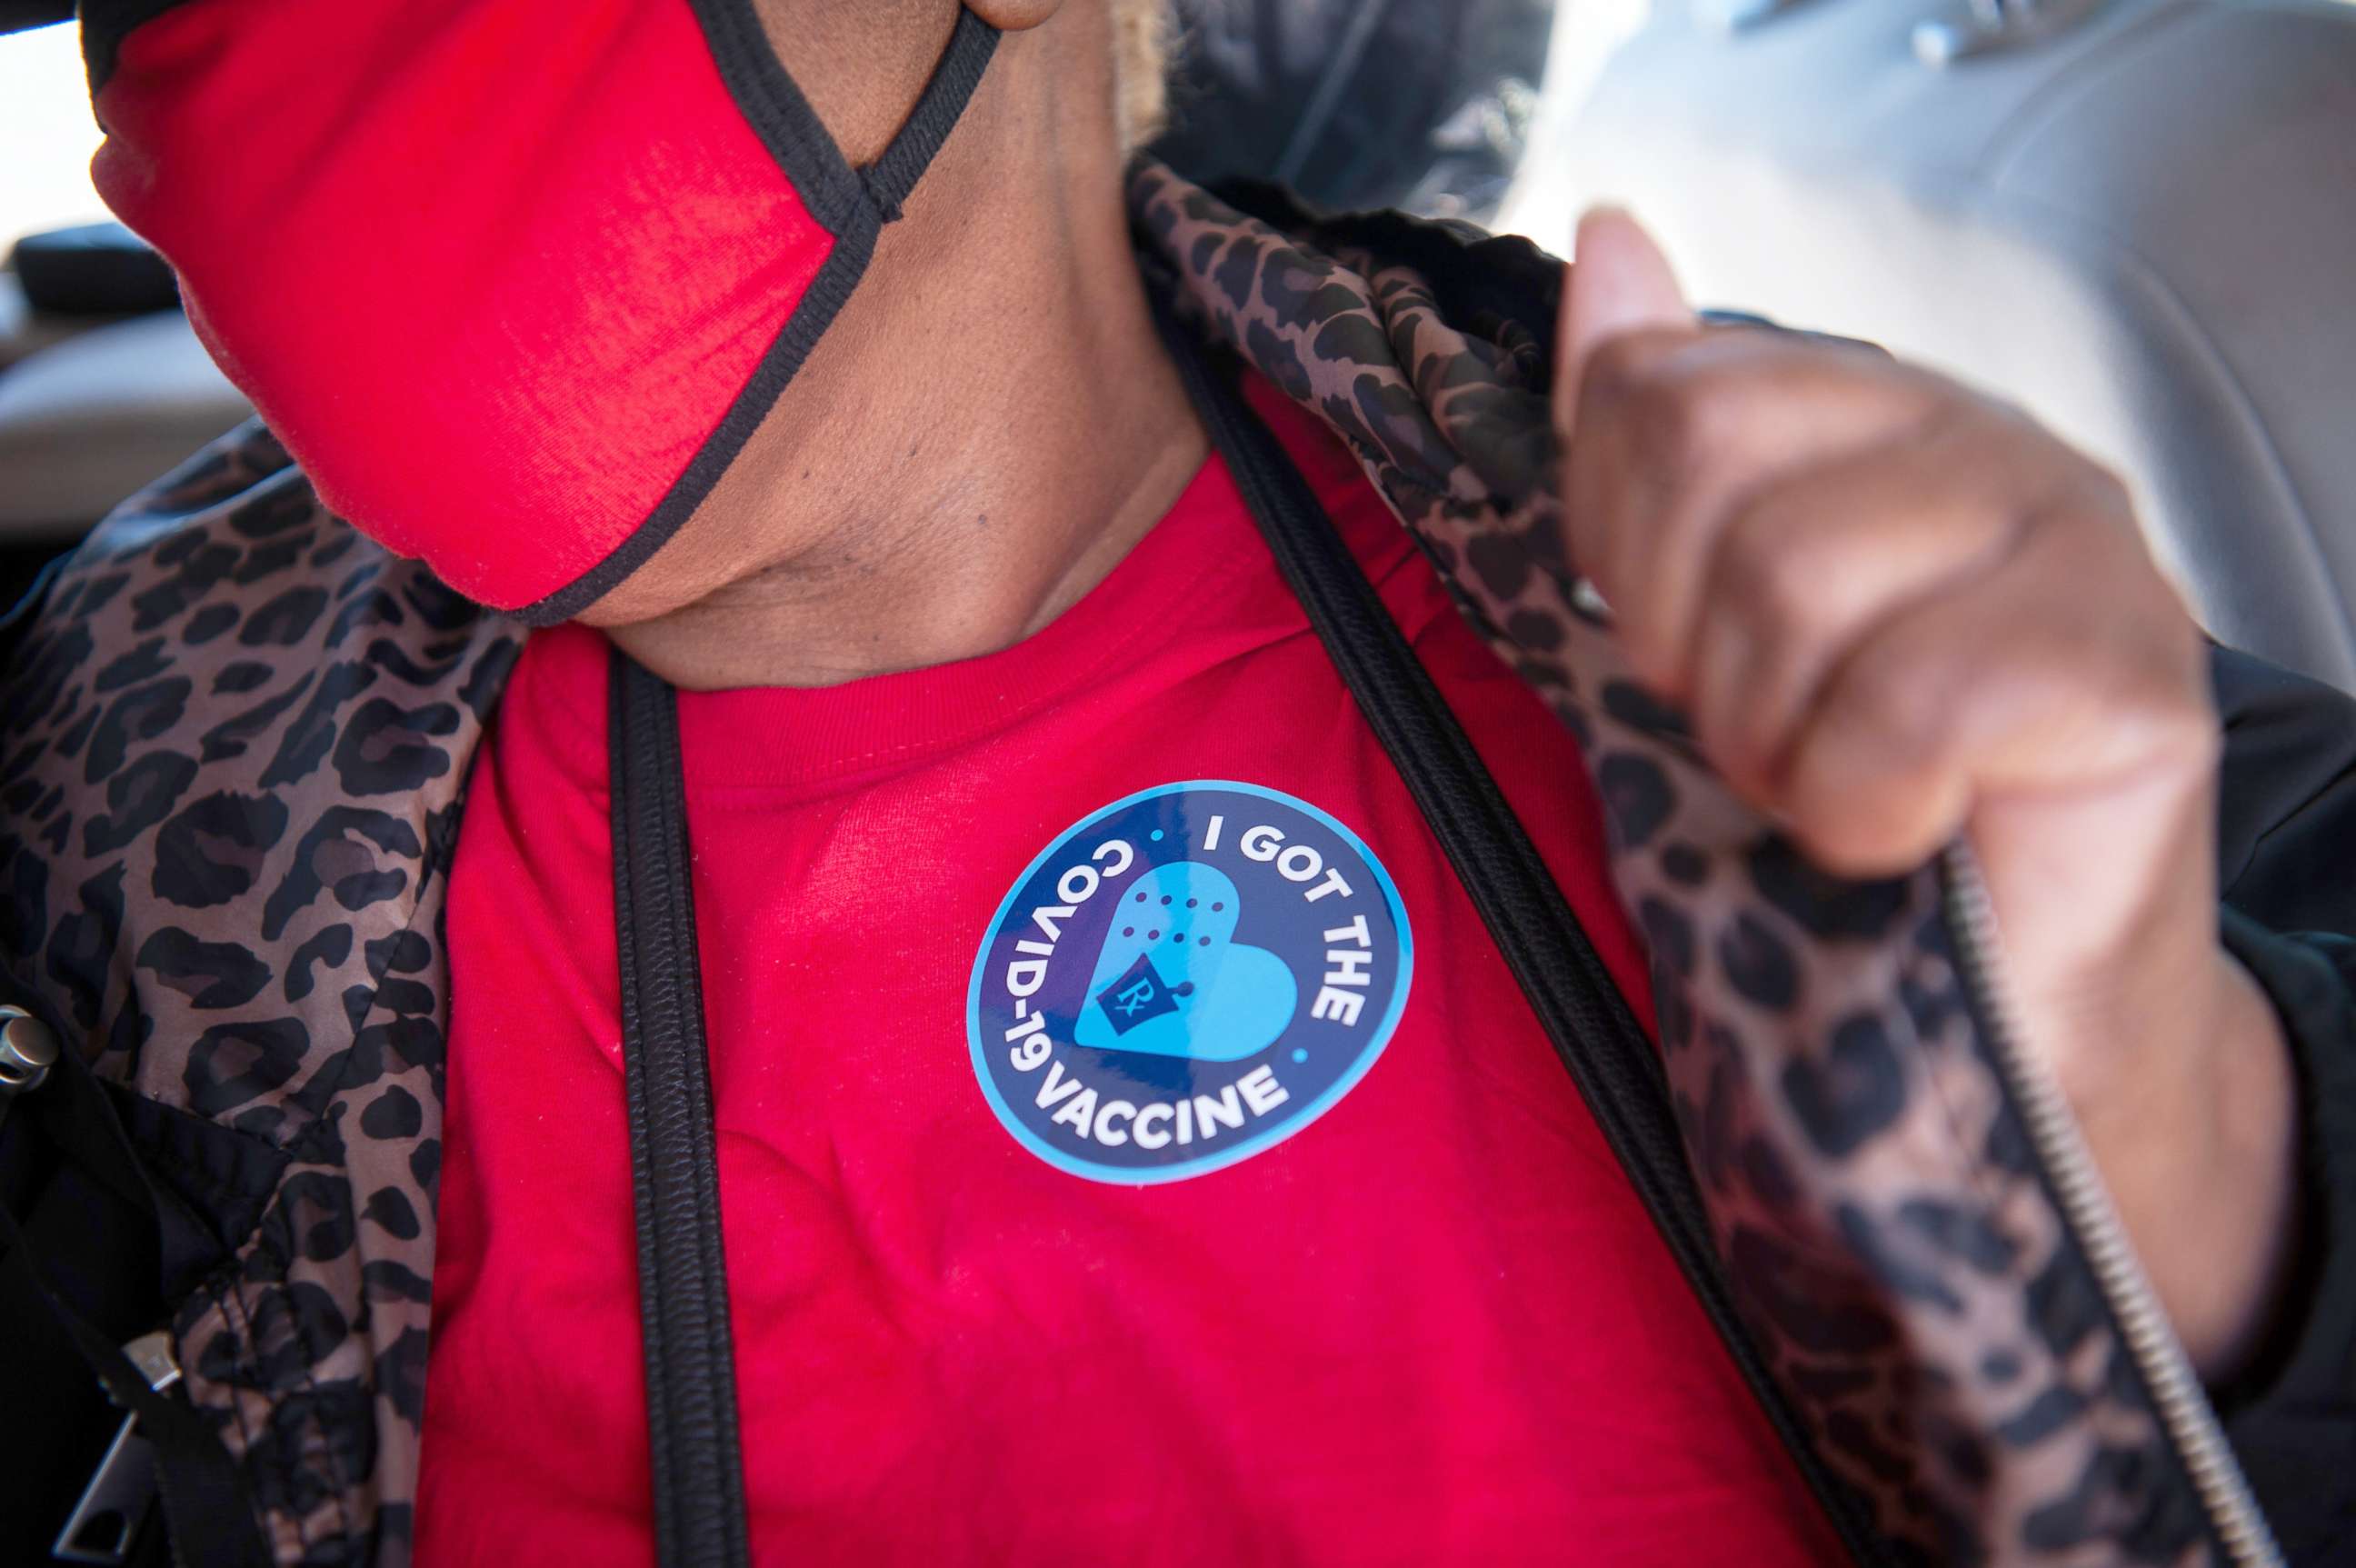 PHOTO: A person displays a sticker after receiving a dose of the Moderna Covid-19 vaccine at a medical clinic in Ruleville, Miss., March 4, 2021. 